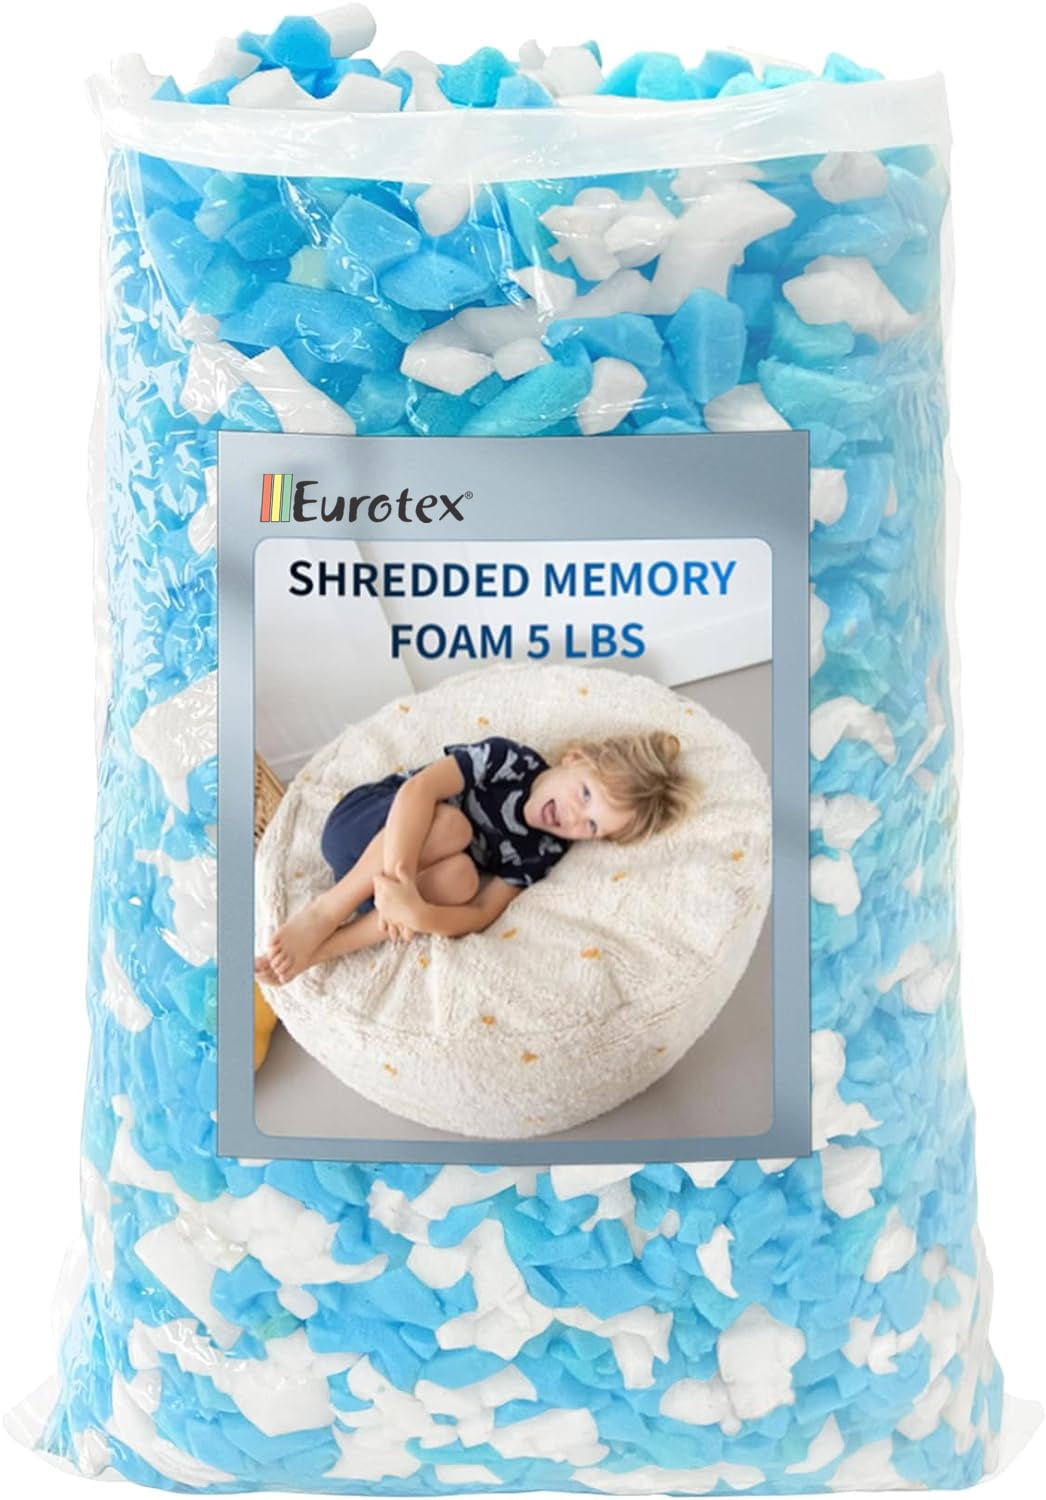 Eurotex Shredded Memory Foam Filling 2.5 lbs for Bean Bag Filler, Gel Particles Refill, Premium Soft and Comfortable Stuffing